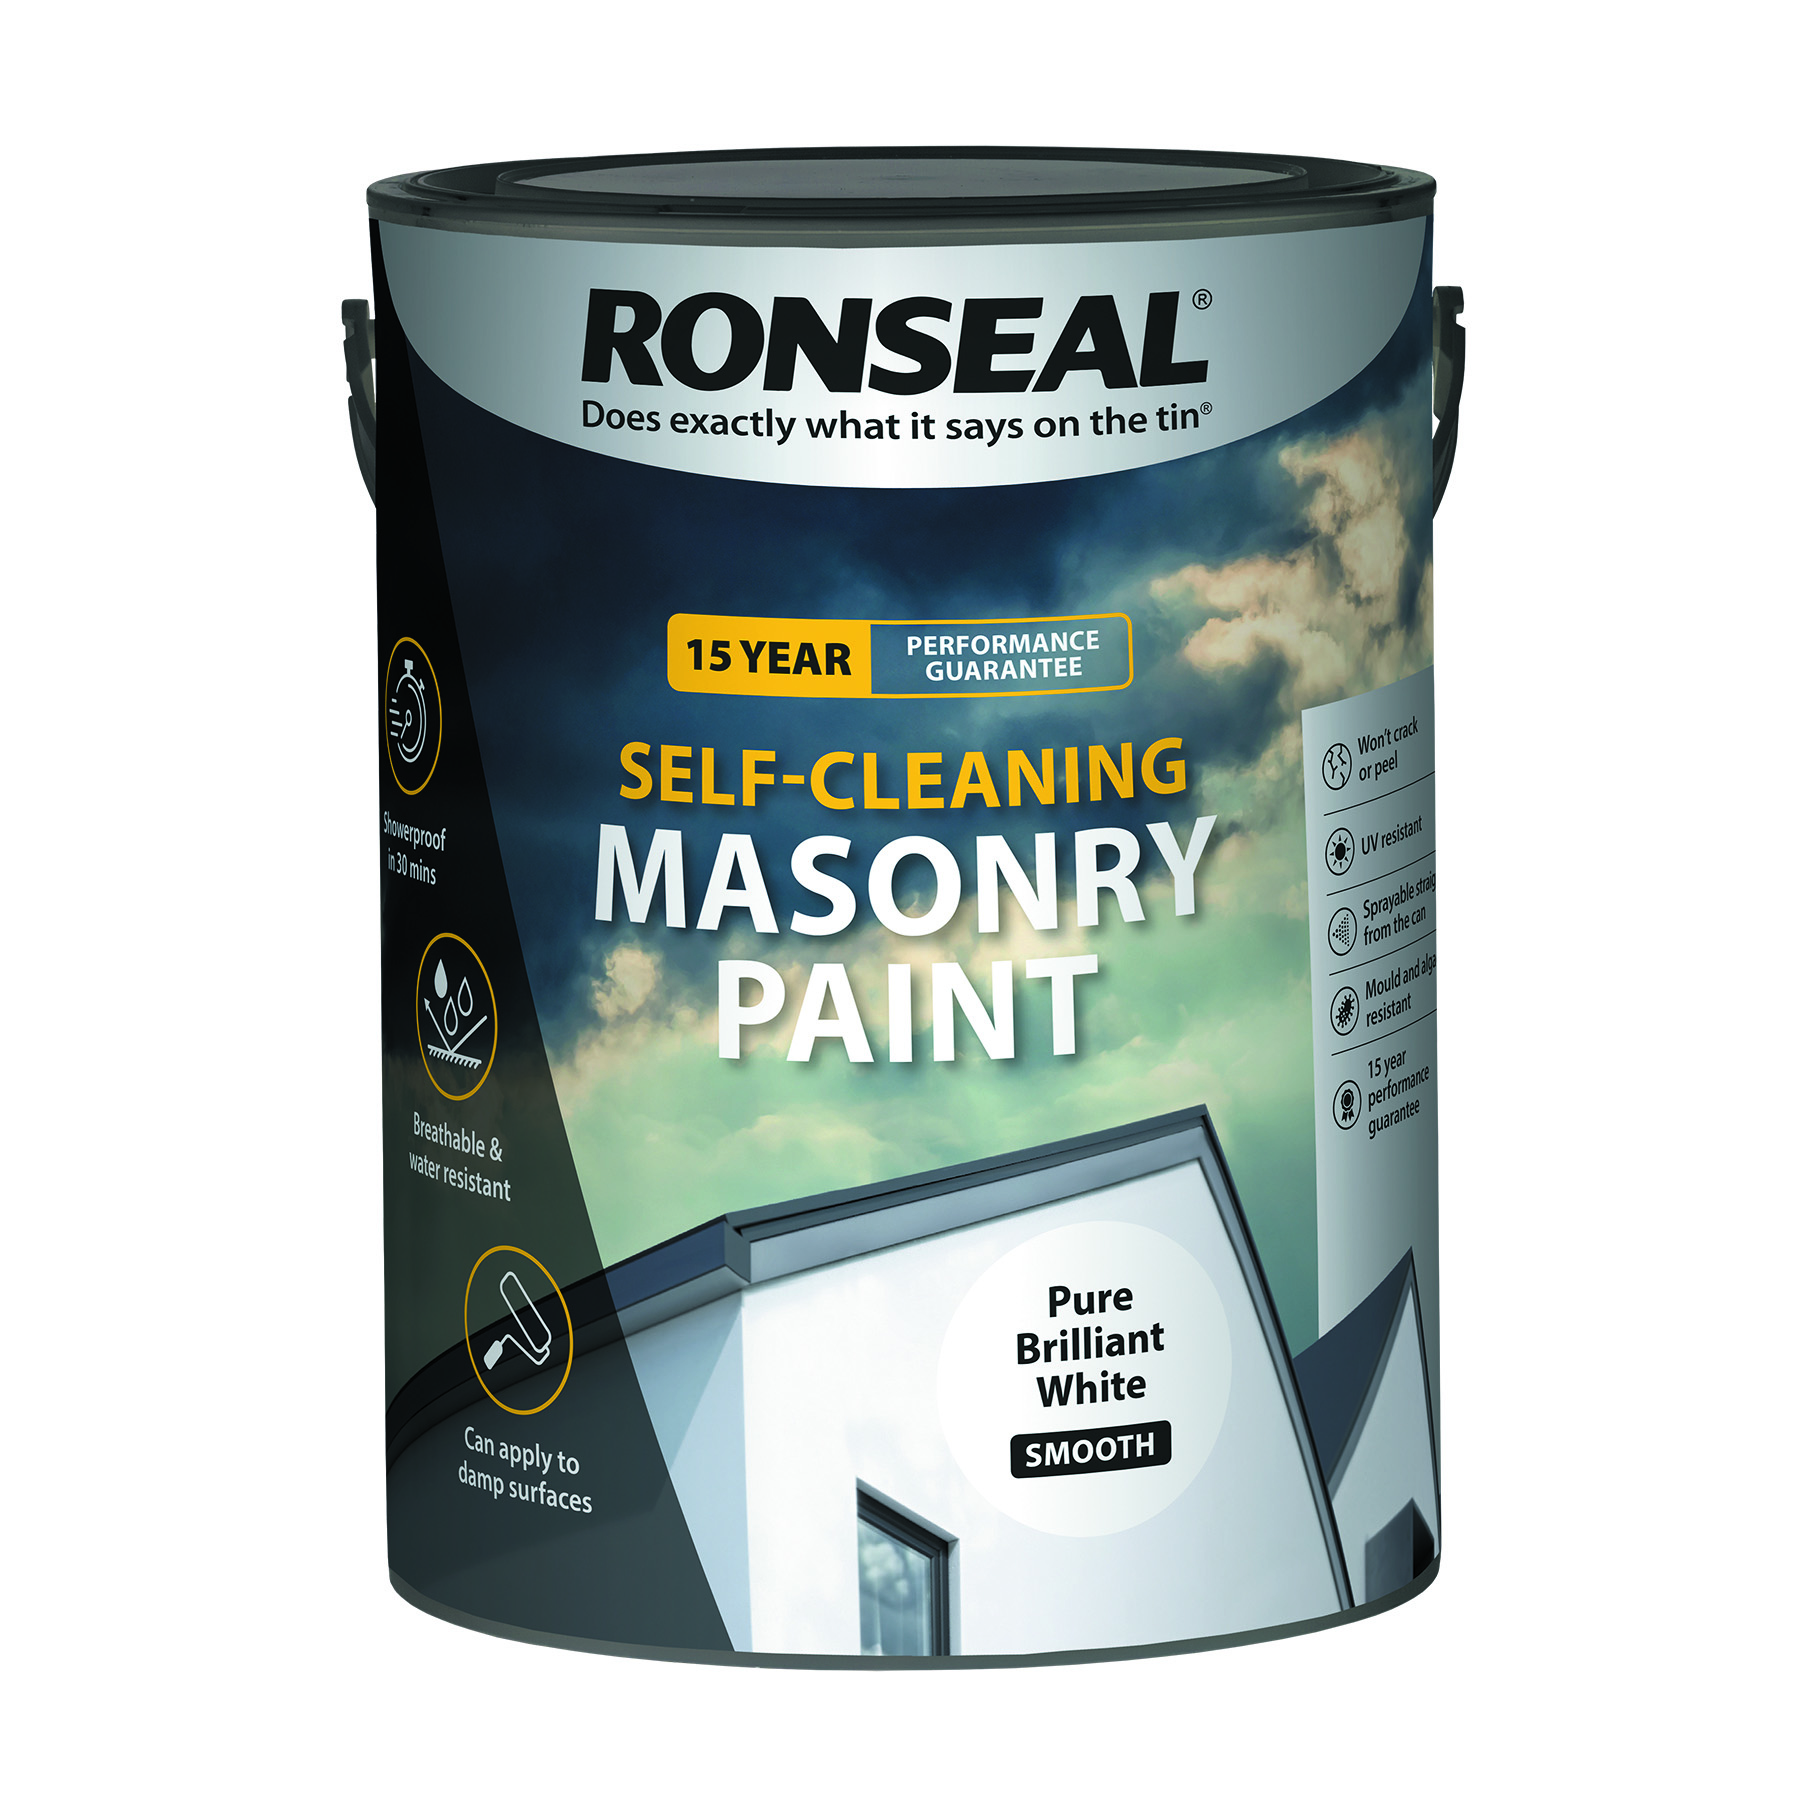 Ronseal Self-cleaning Masonry Paint - Pure Brilliant White - 5l